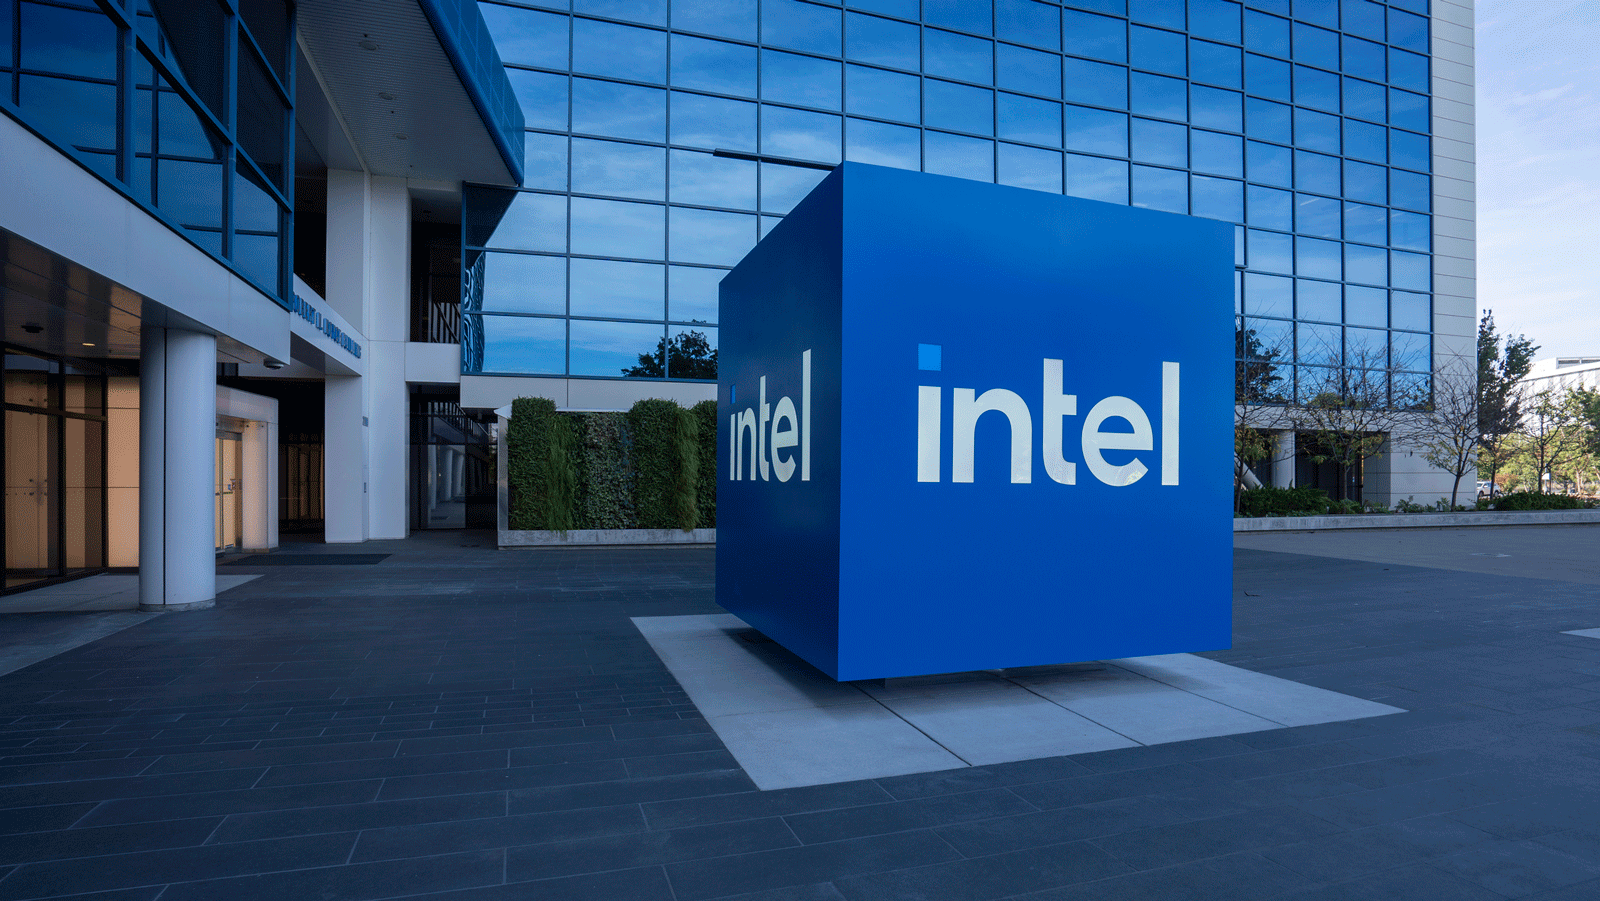 Apollo and Intel in talks to finance $11bn chipmaking plant in Ireland